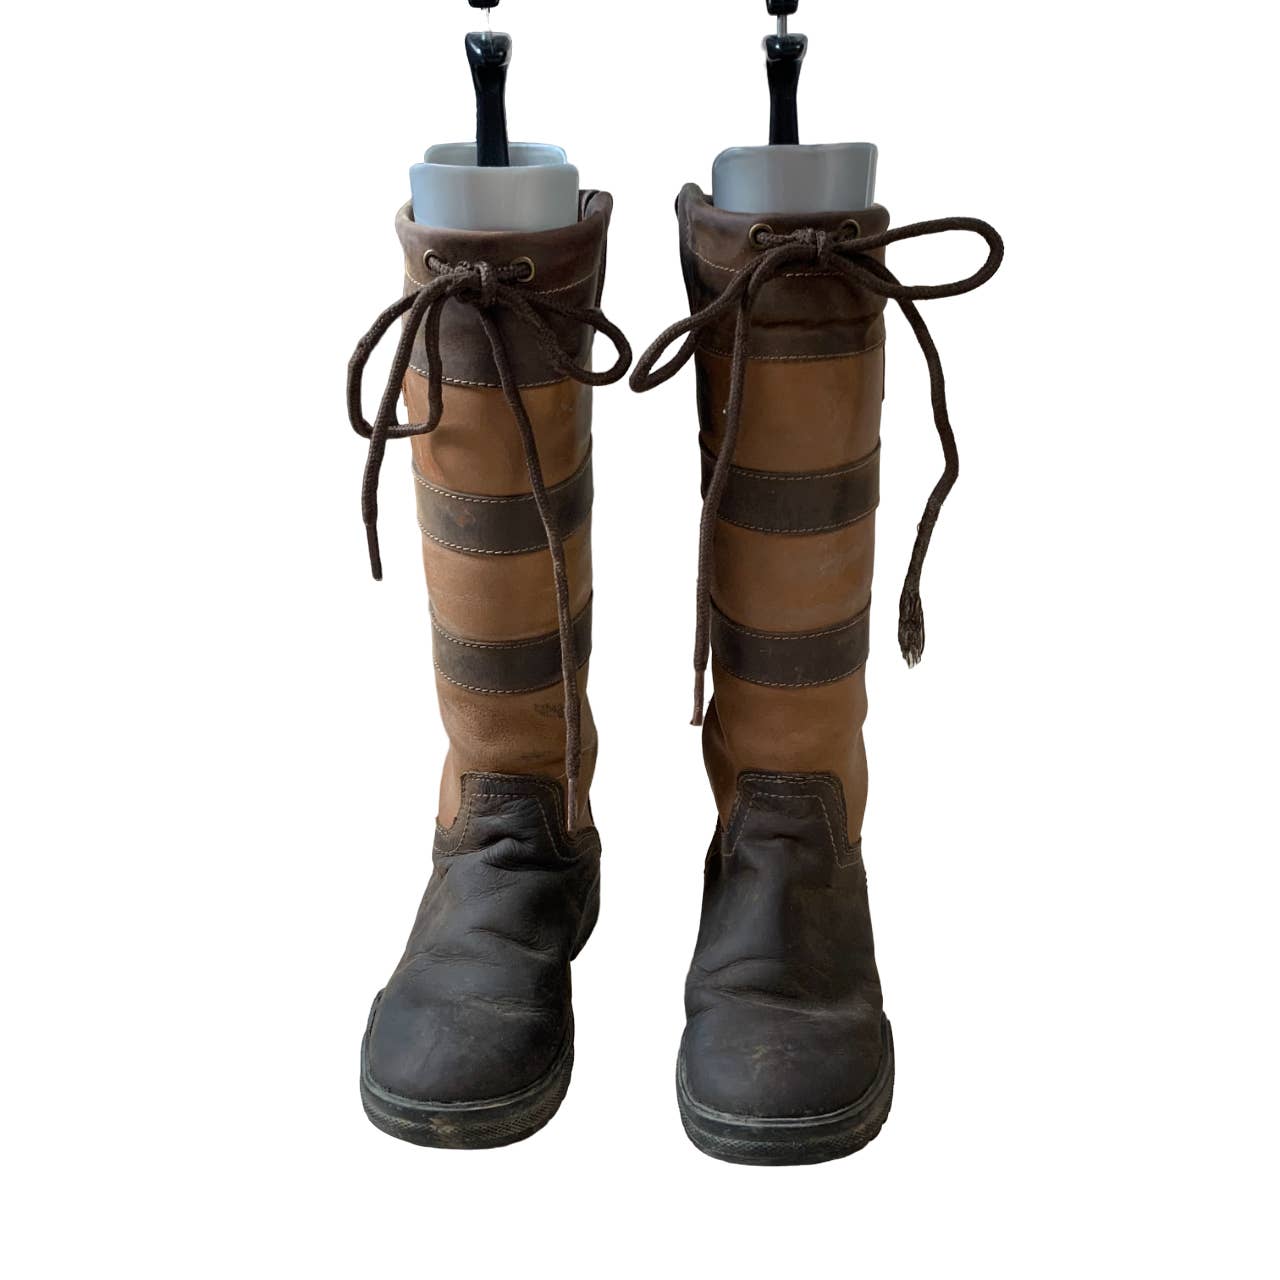 TuffRider 'Lexington' Riding Boots in Chocolate & Fawn - Youth 3